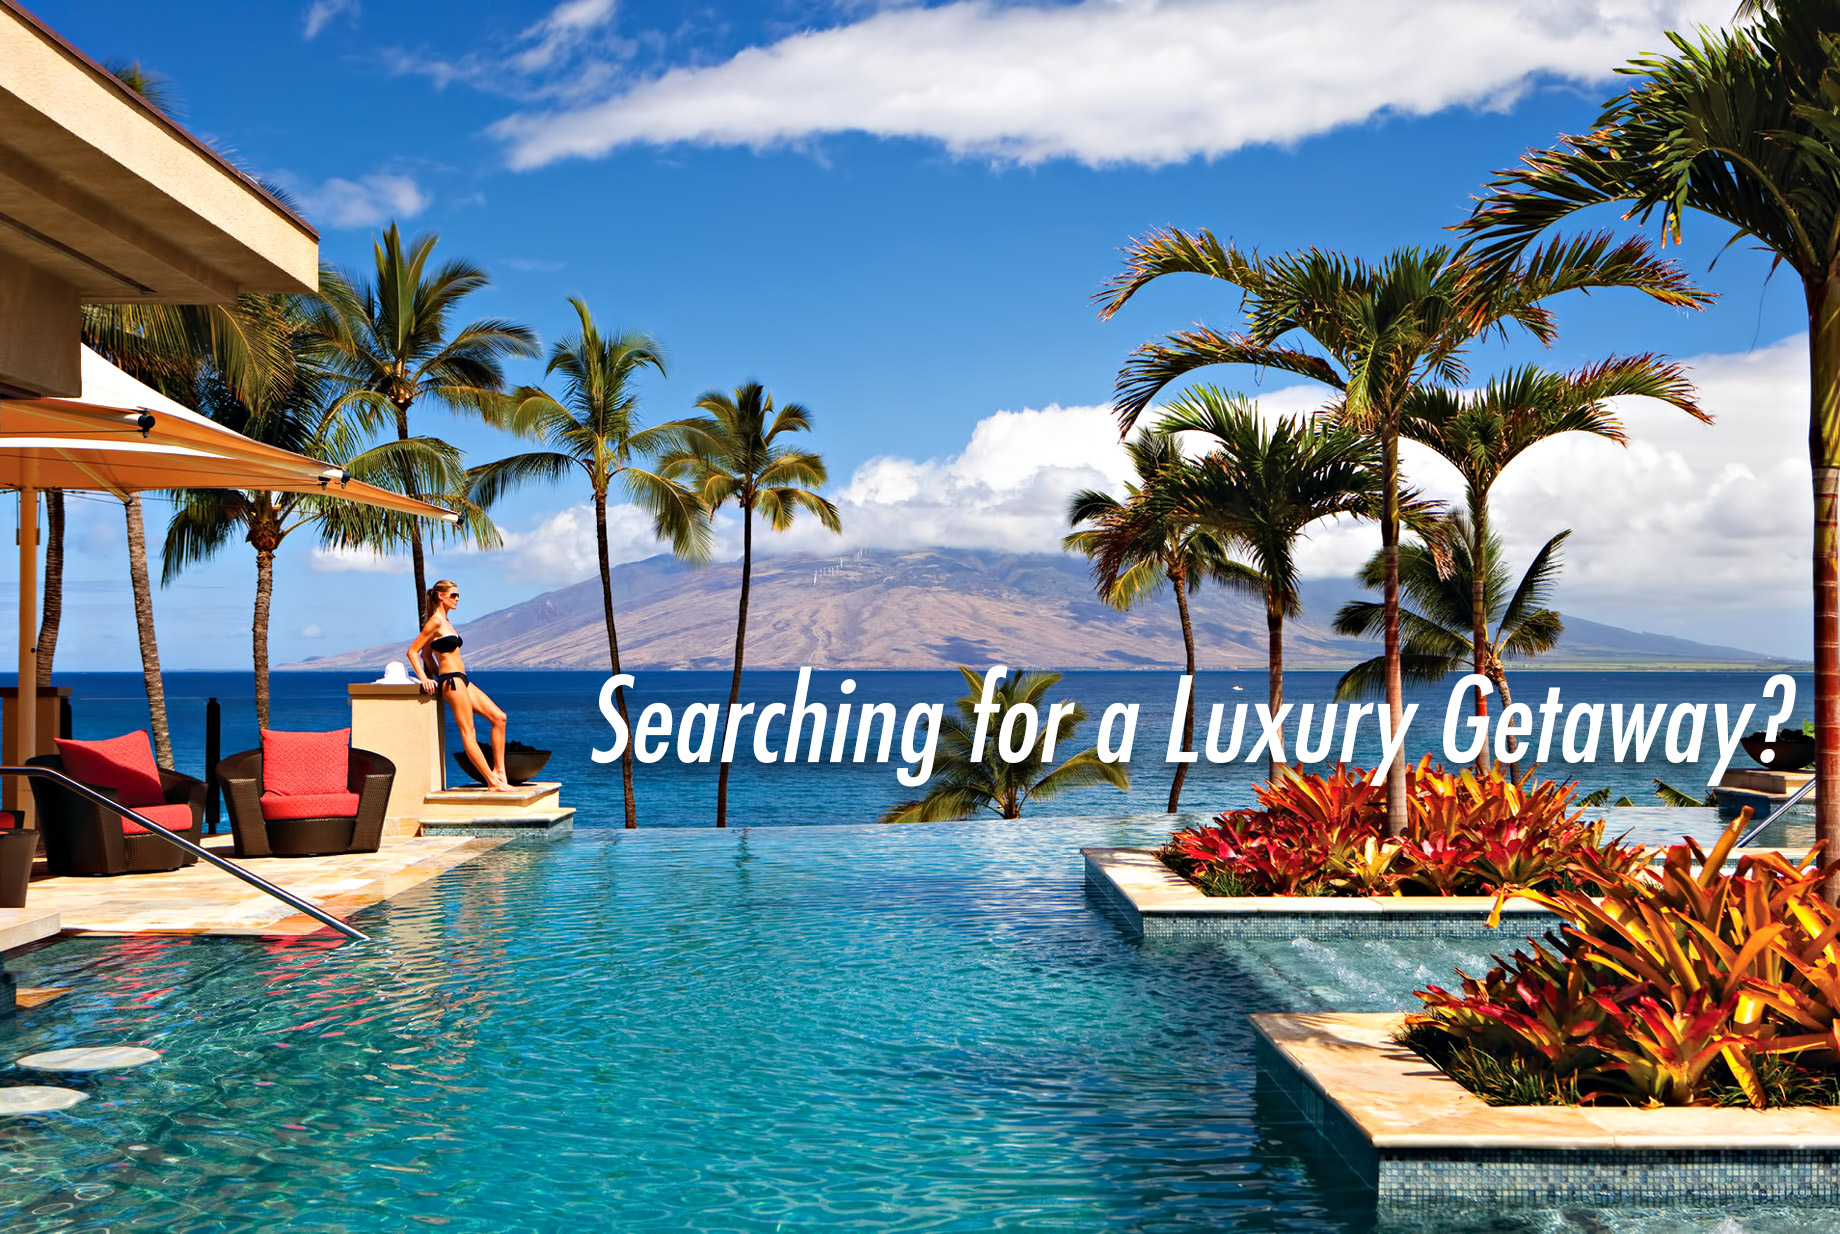 Searching for a Luxury Getaway - Here Are 3 Serene Vacation Spots to Help You Unwind